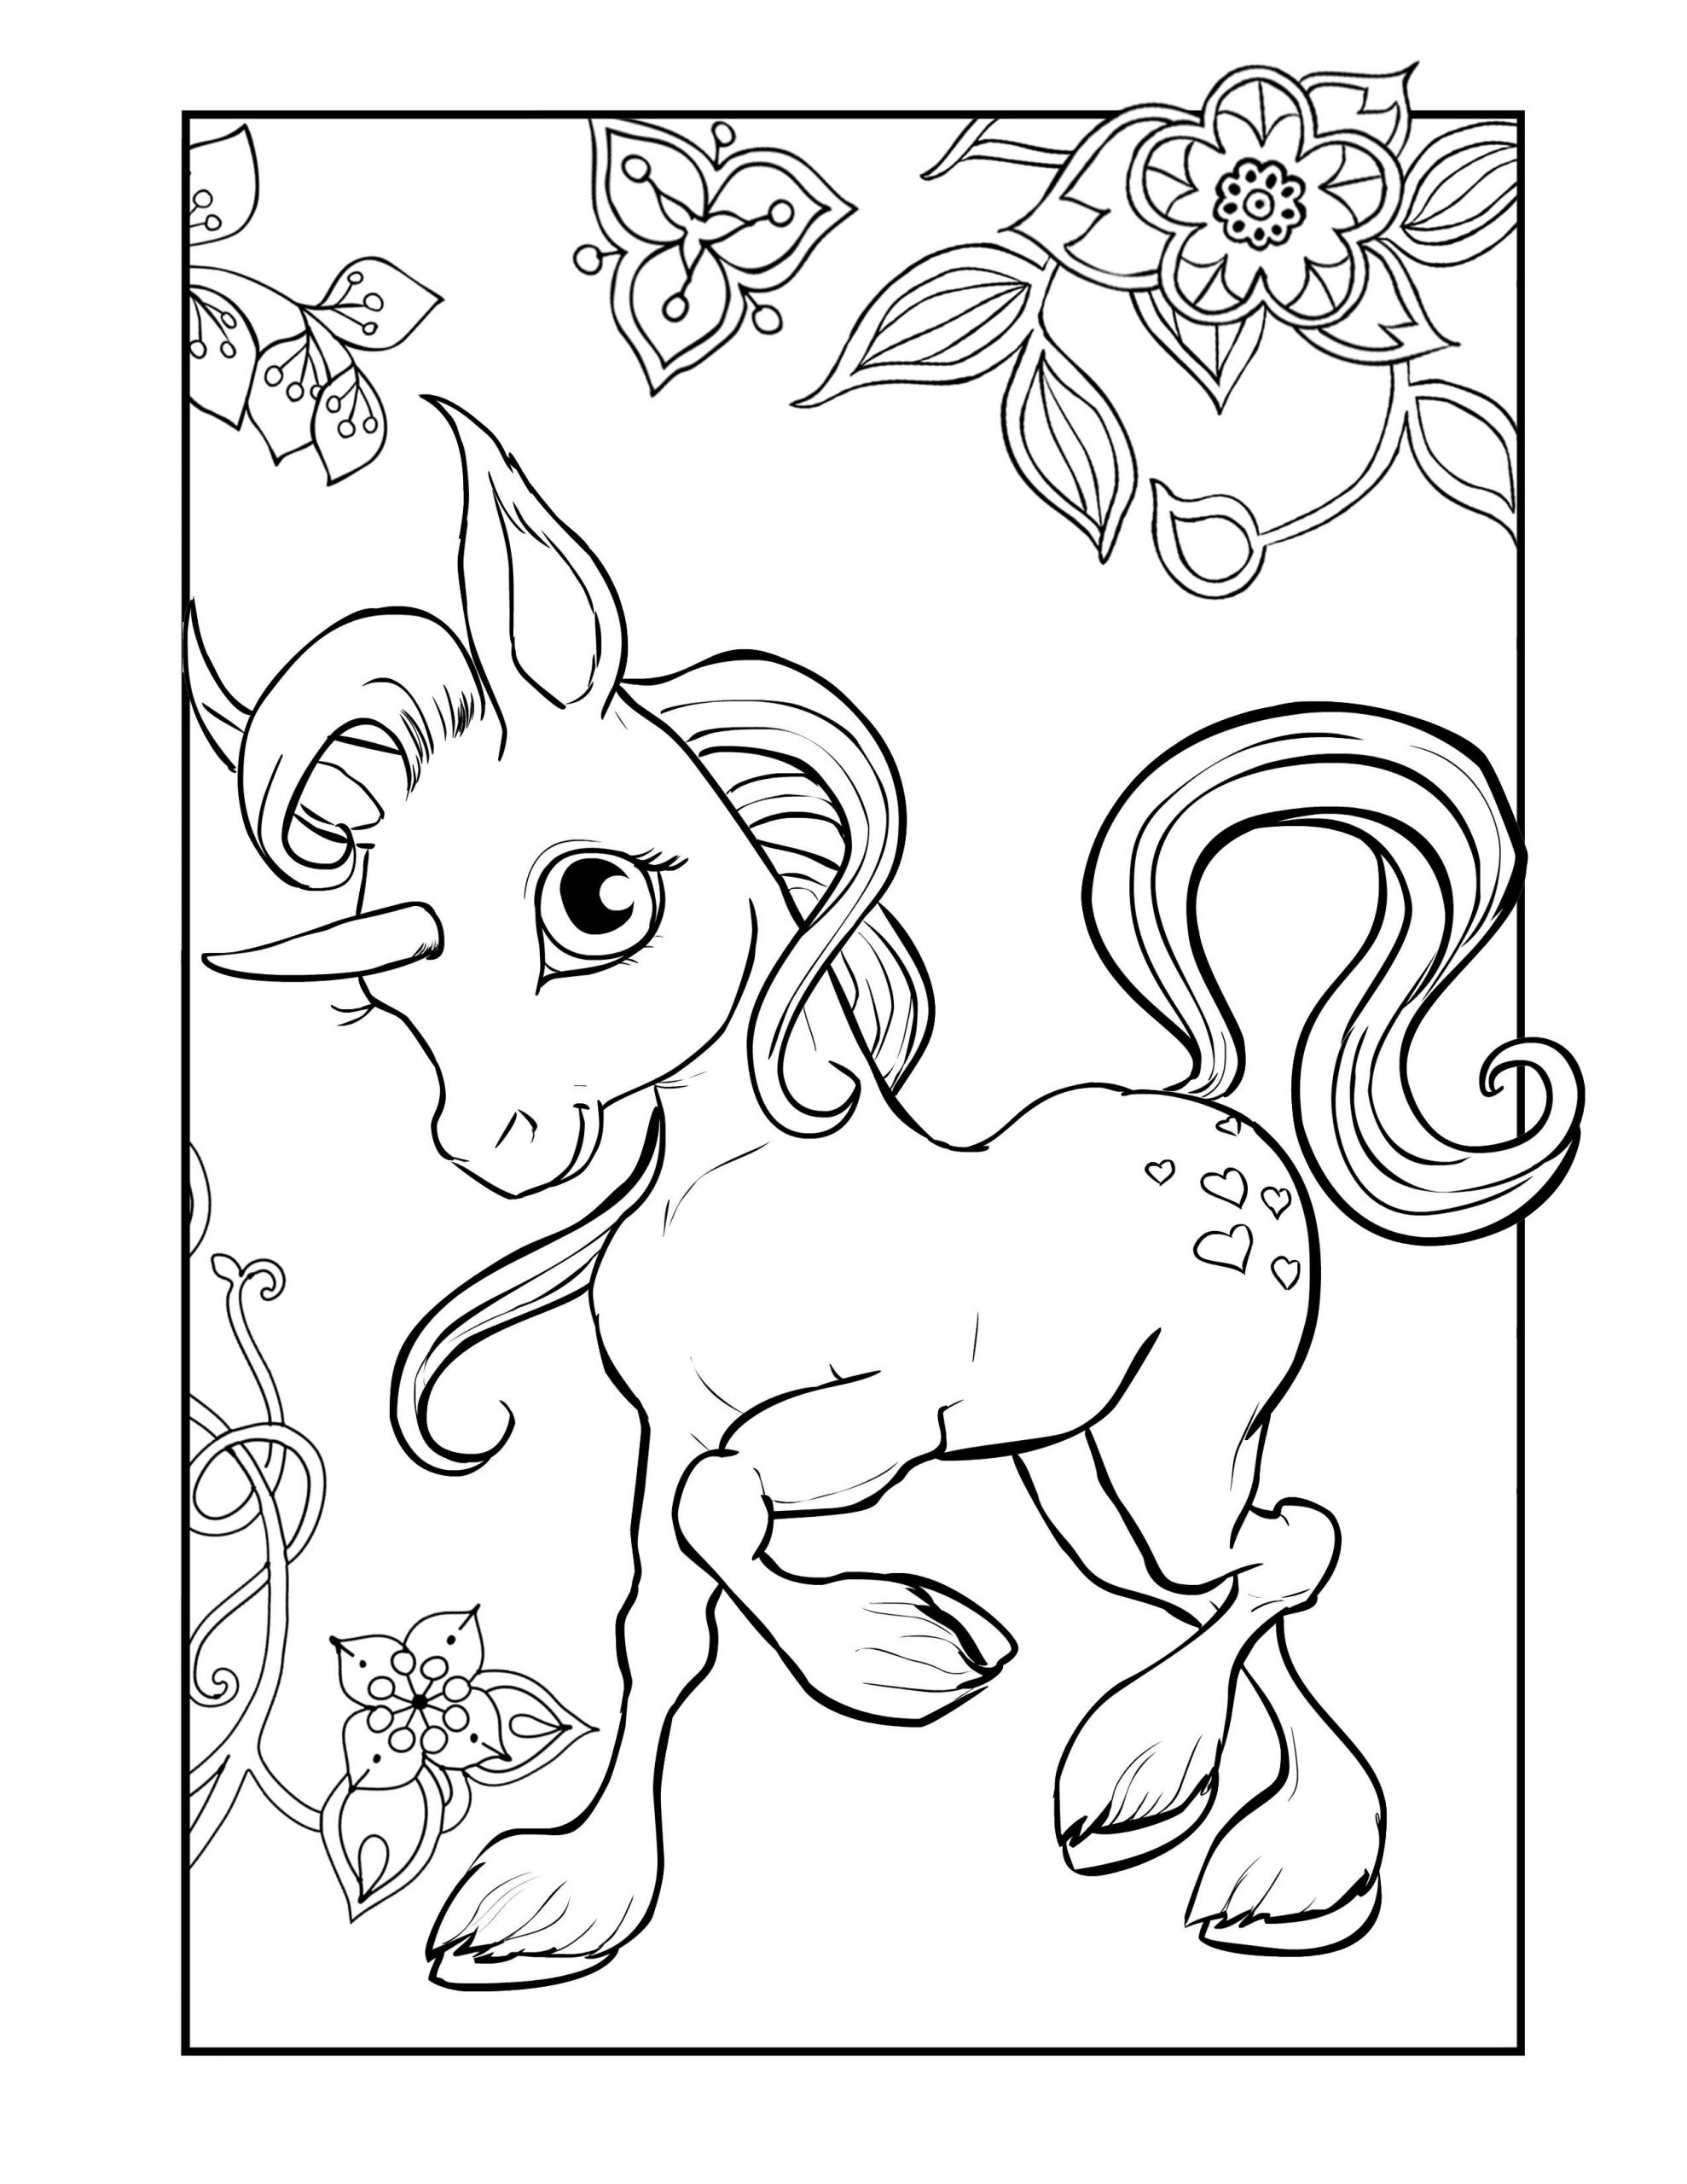 Coloring Pages For Girls Pdf
 Unicorn To Color Pdf